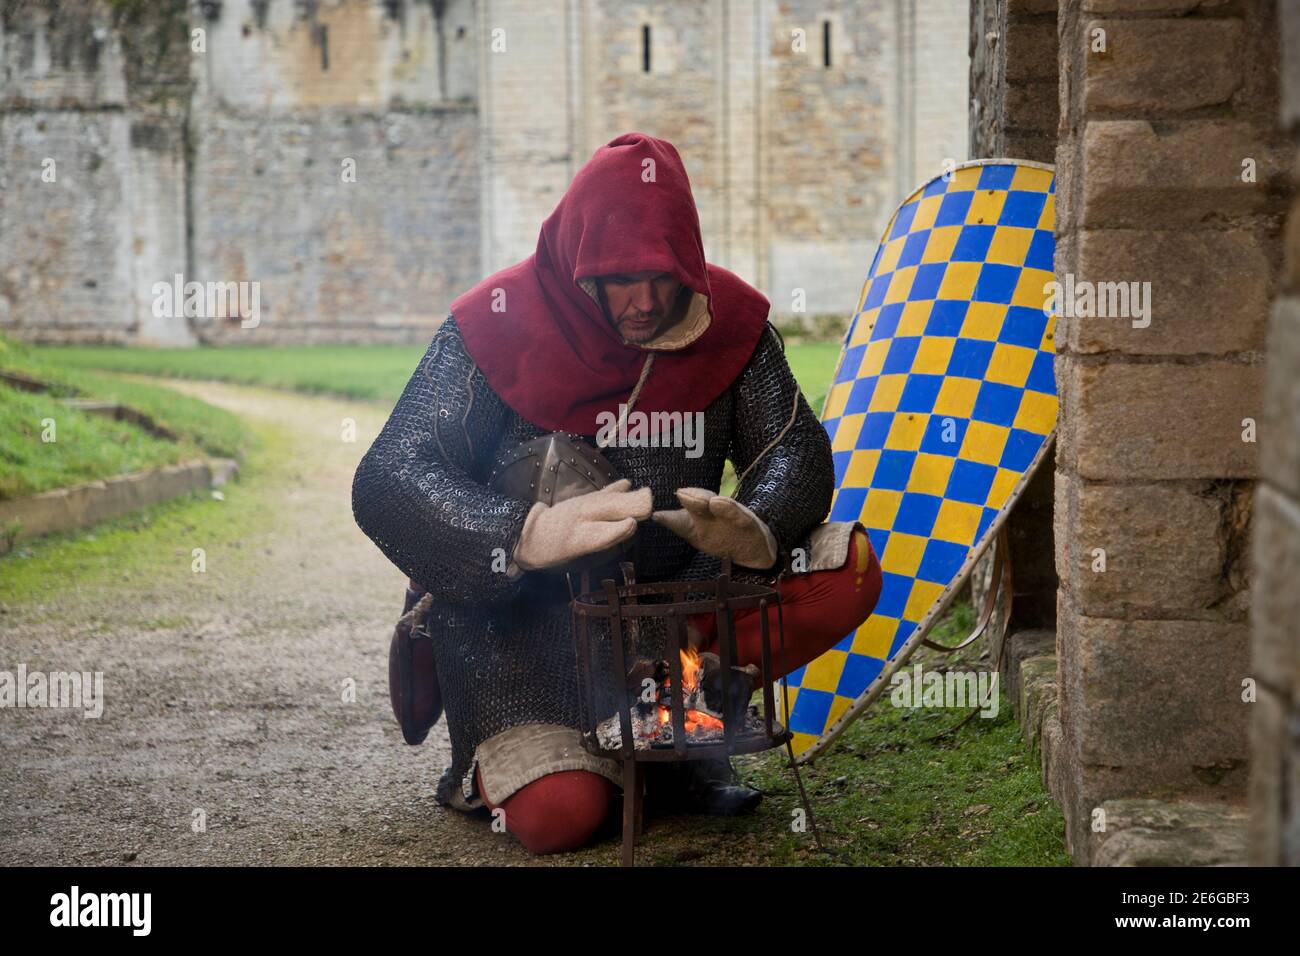 12th century soldier keeping warm by brazier outside 12th century castle Stock Photo